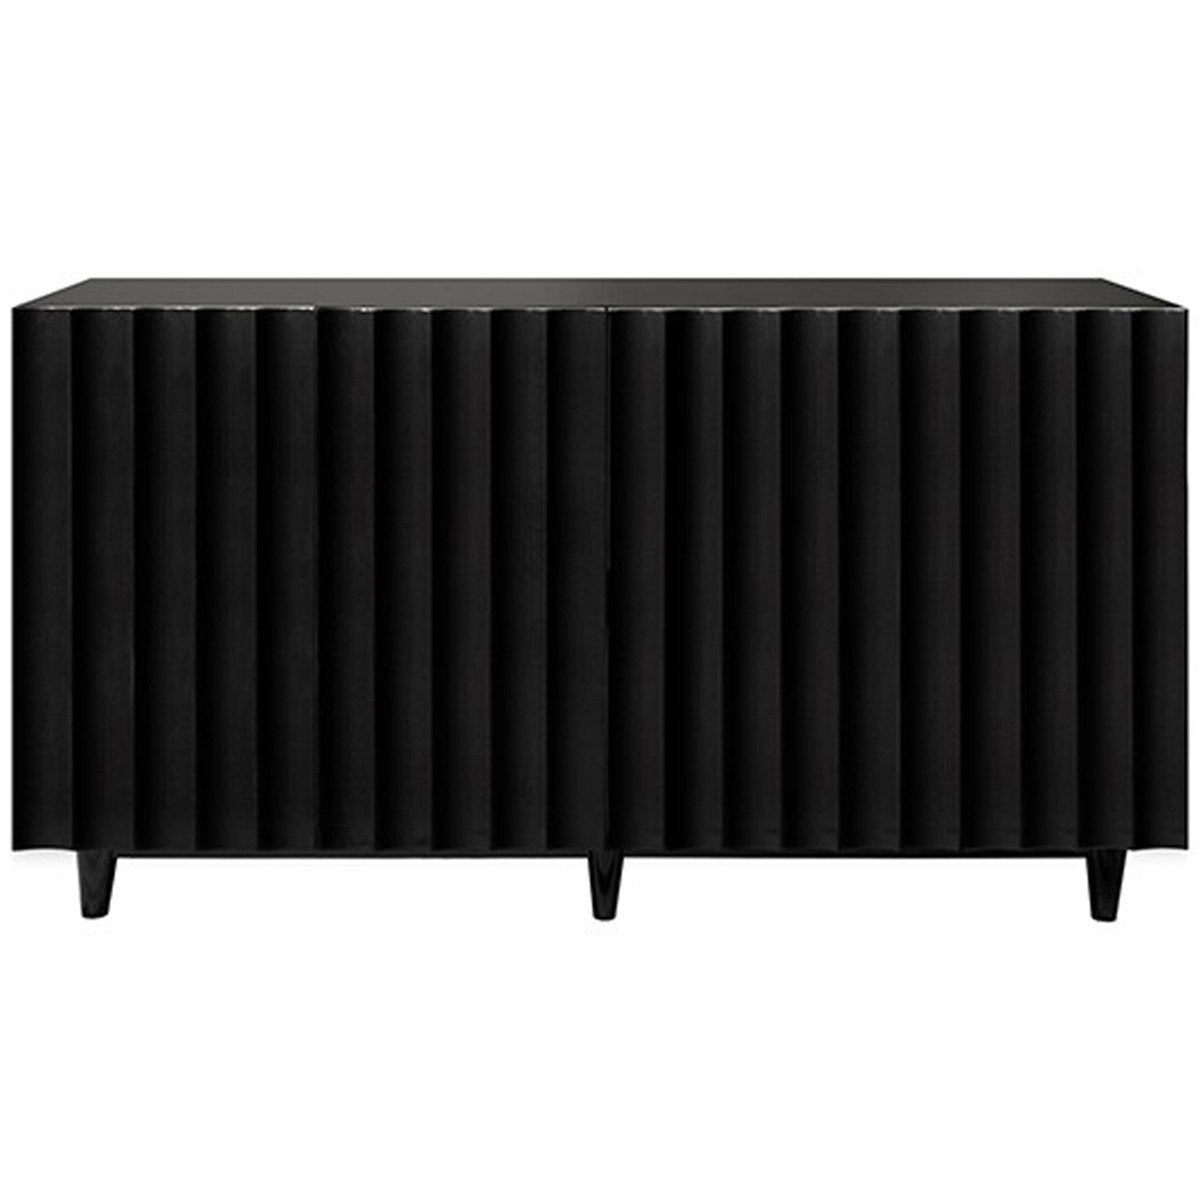 Worlds Away Lacquer 4-Door Scalloped Front Cabinet